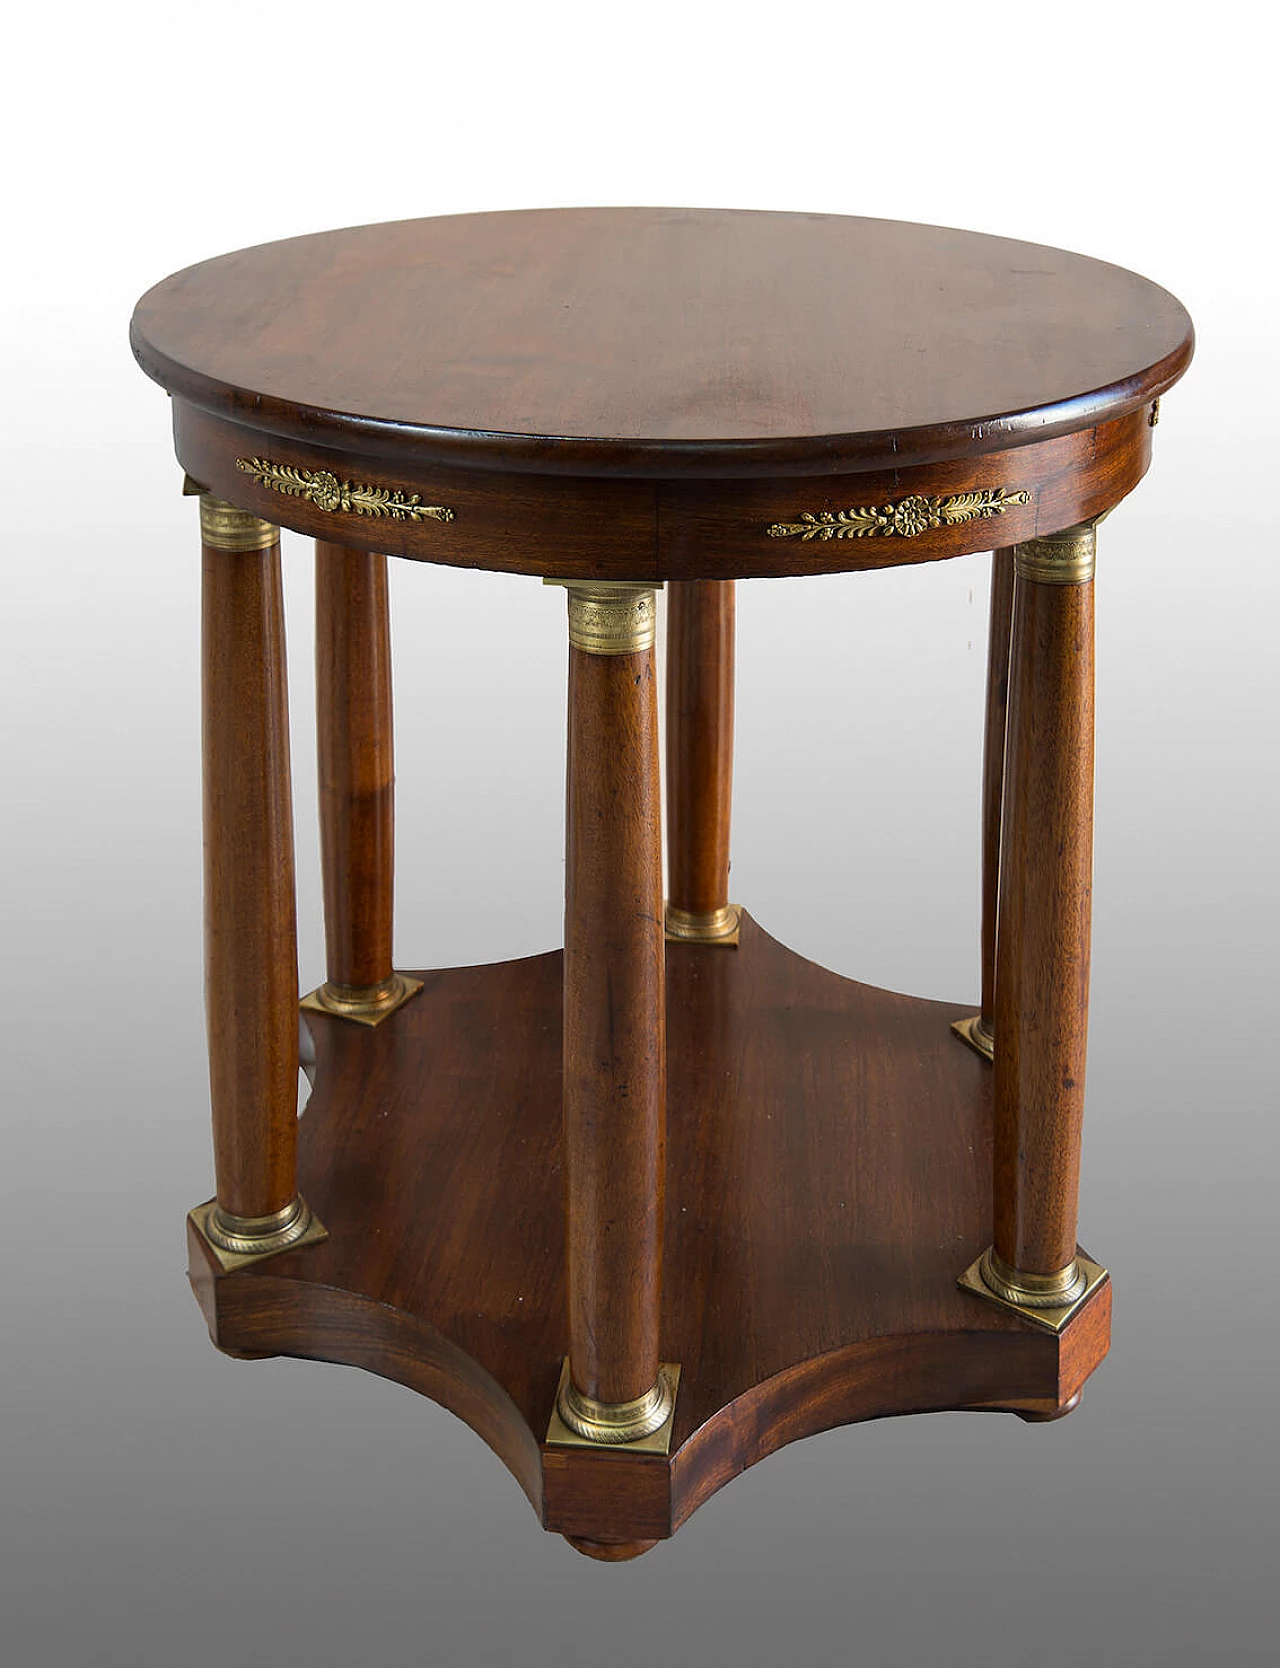 French Empire mahogany side table with bronze details, 19th century 3